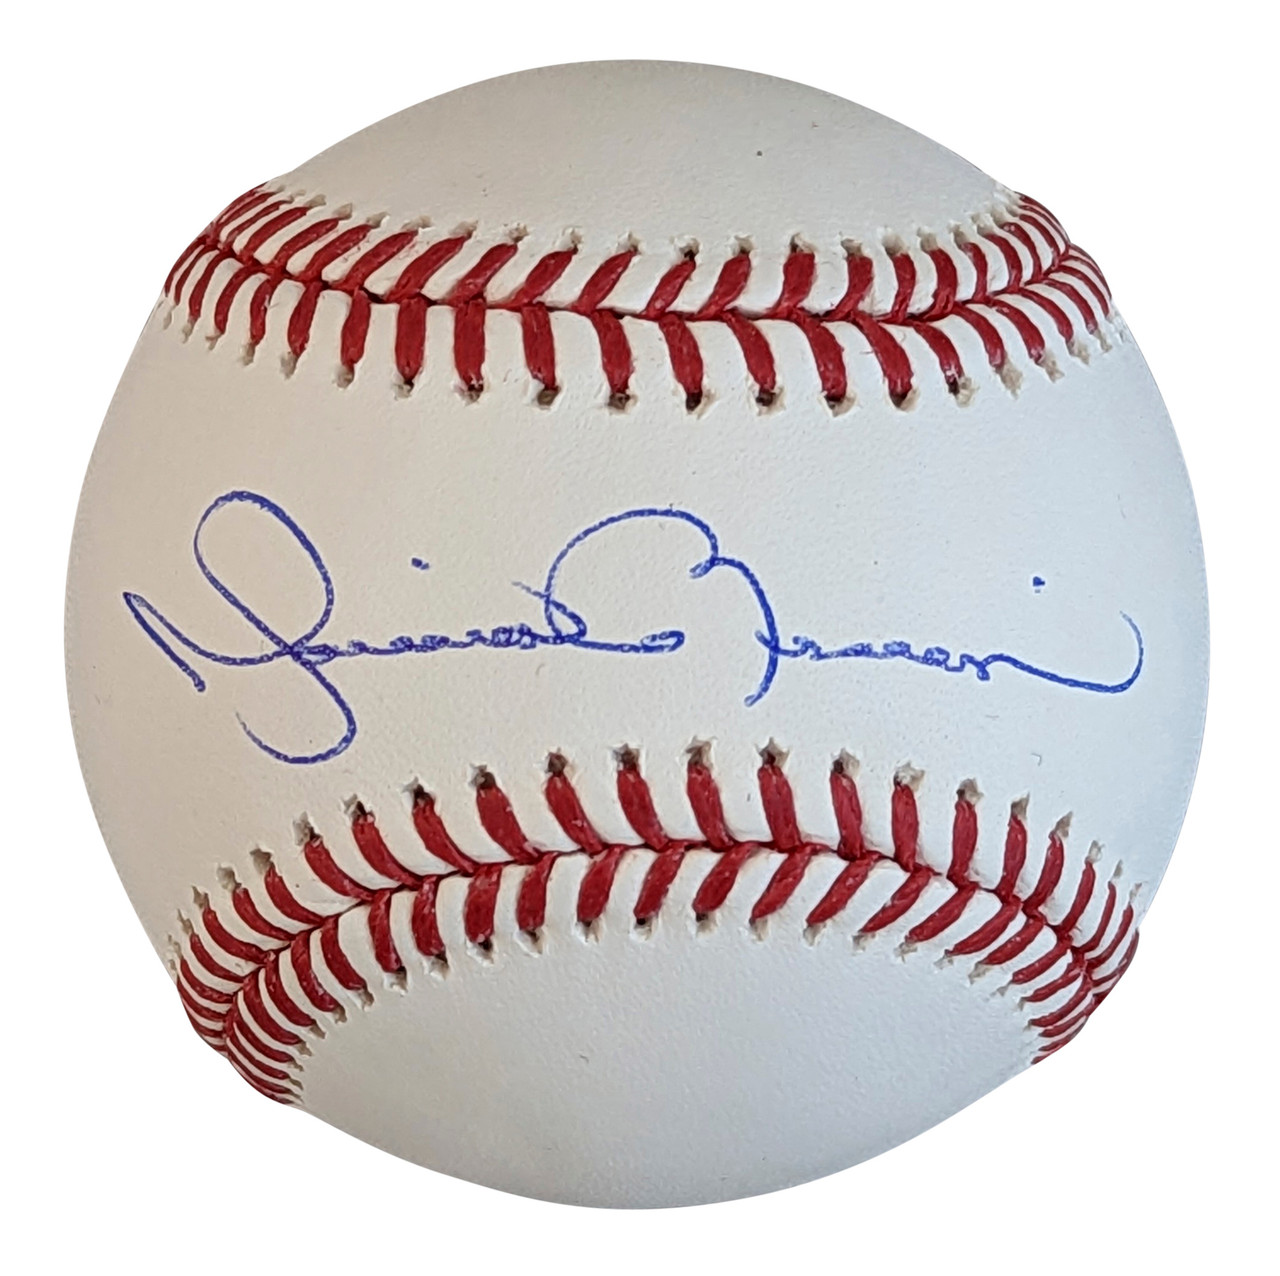 Mariano Rivera Autograph In Mlb Autographed Baseballs for sale